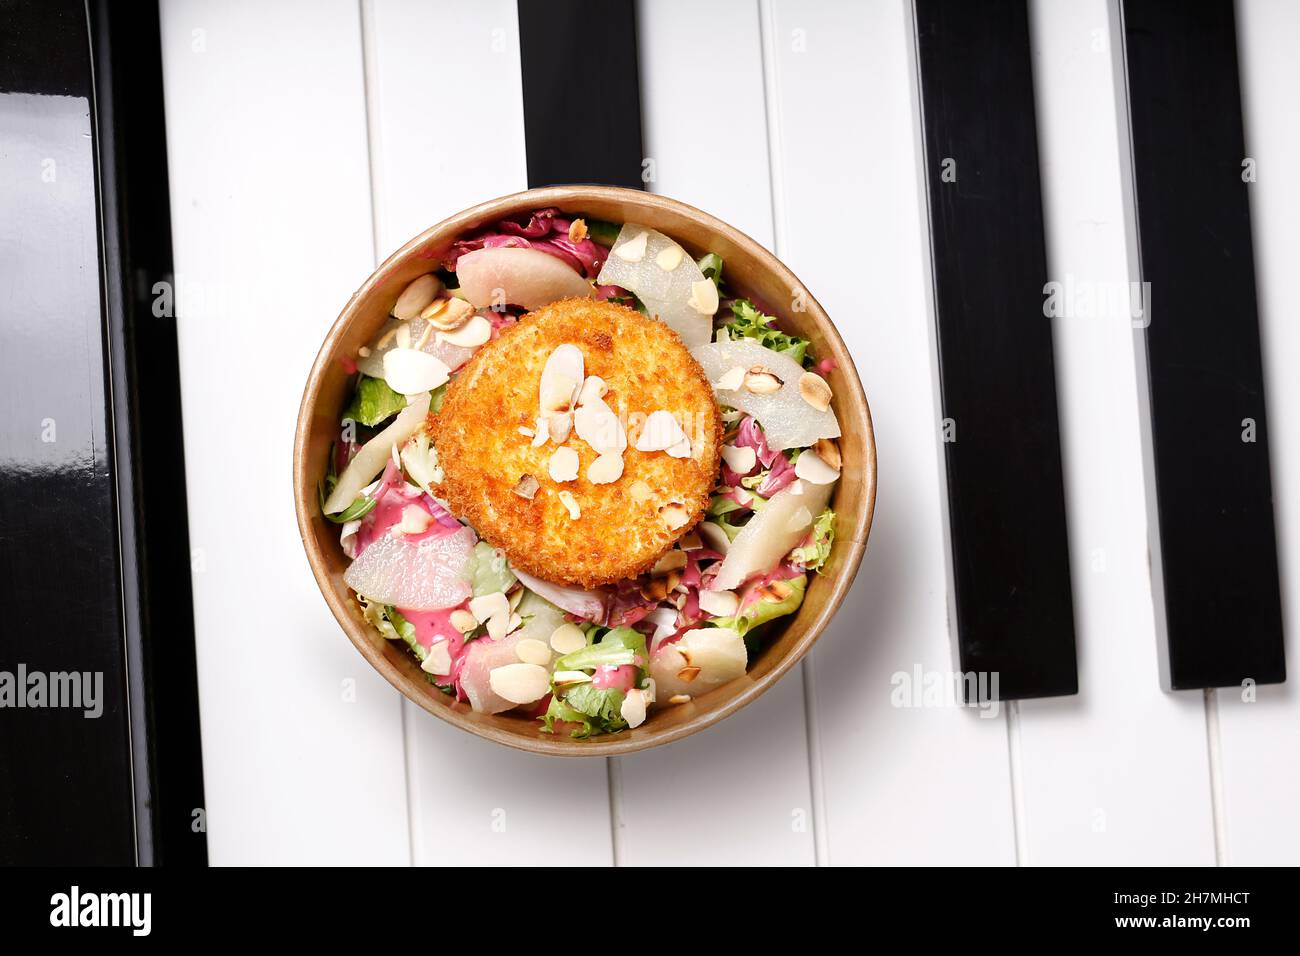 Fried camembert cheese on a green salad. Takeaway, diet box. Appetizing ready-to-go dish served in a disposable box. Culinary photography. Food backgr Stock Photo